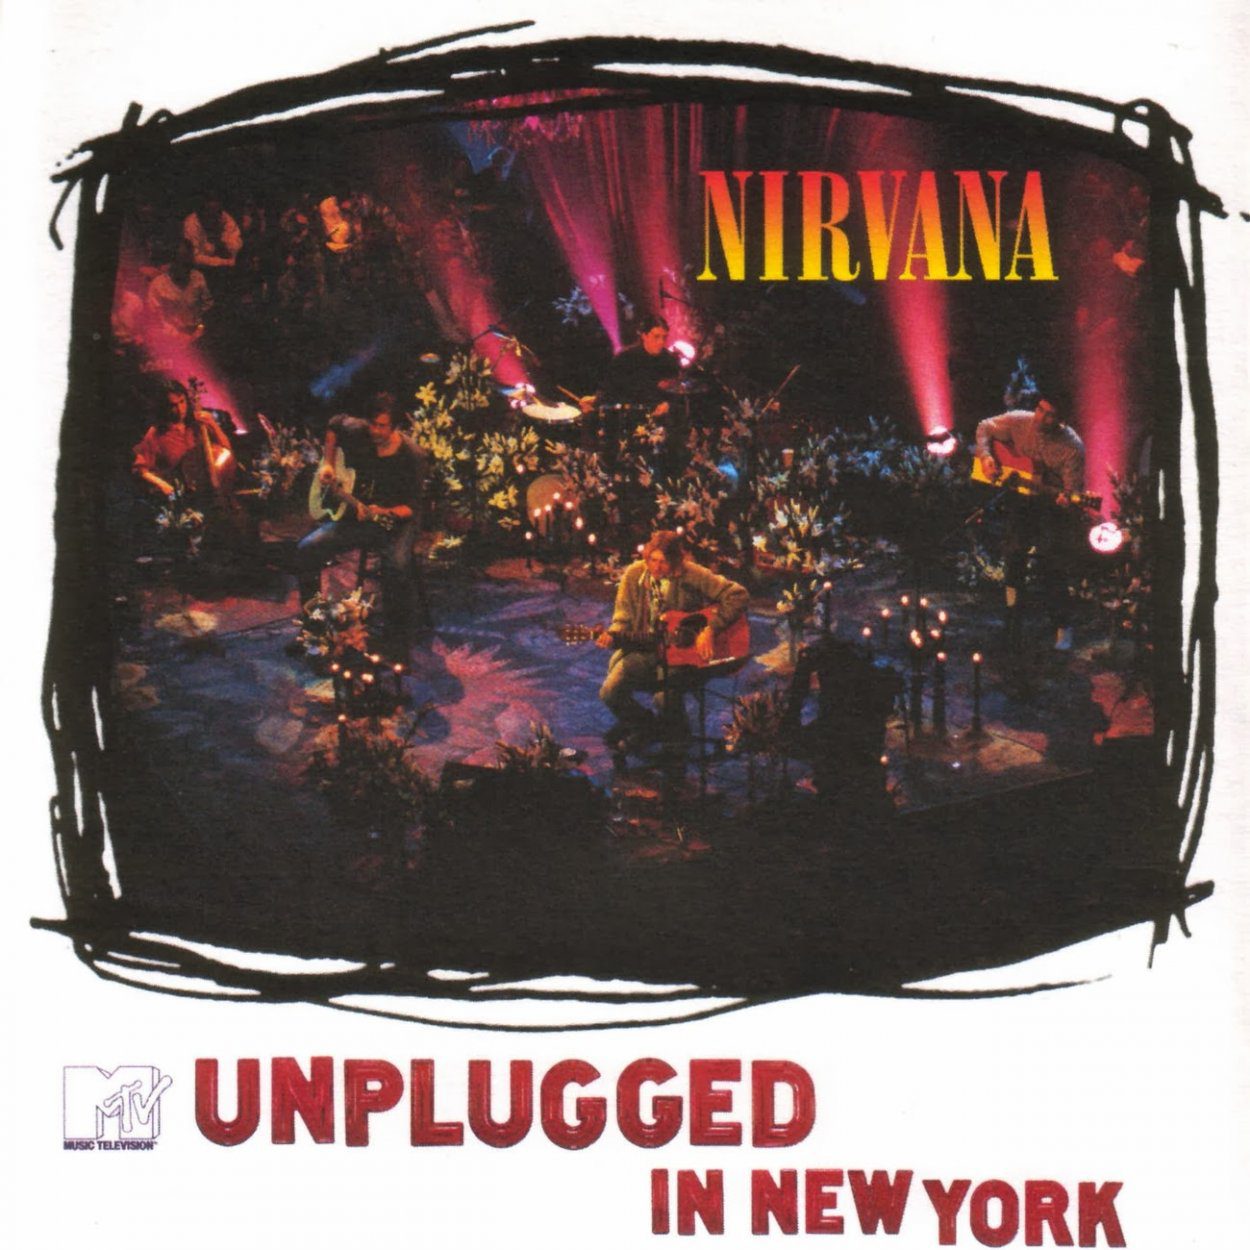 A white background gives way to a loose rectangle where we see Nirvana on stage with a number of players behind them in a small performance space.